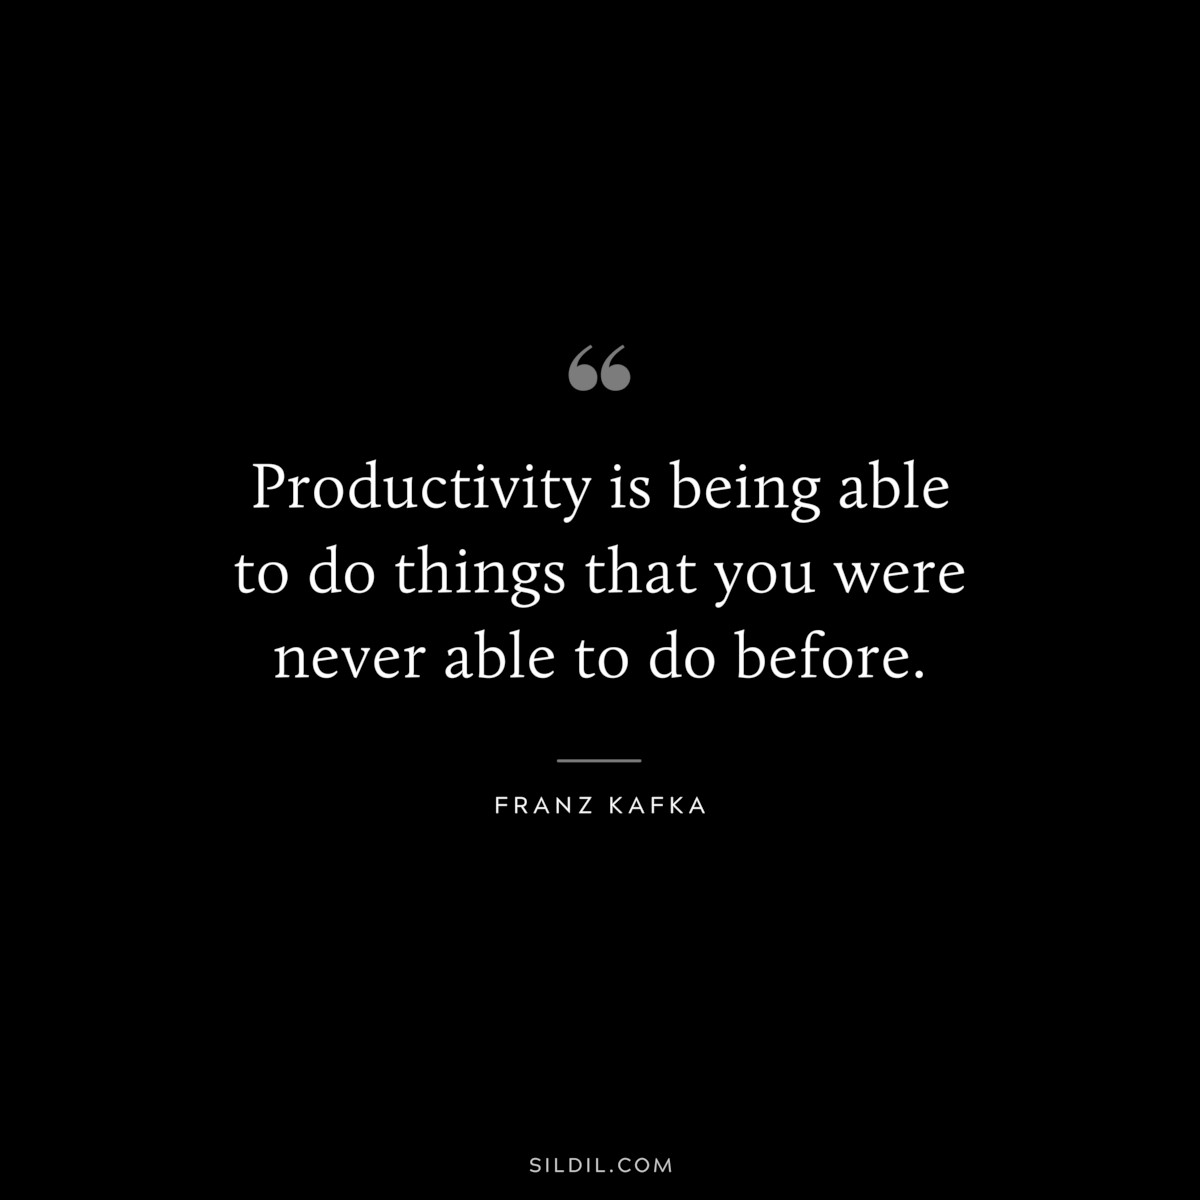 Productivity is being able to do things that you were never able to do before. ― Franz Kafka